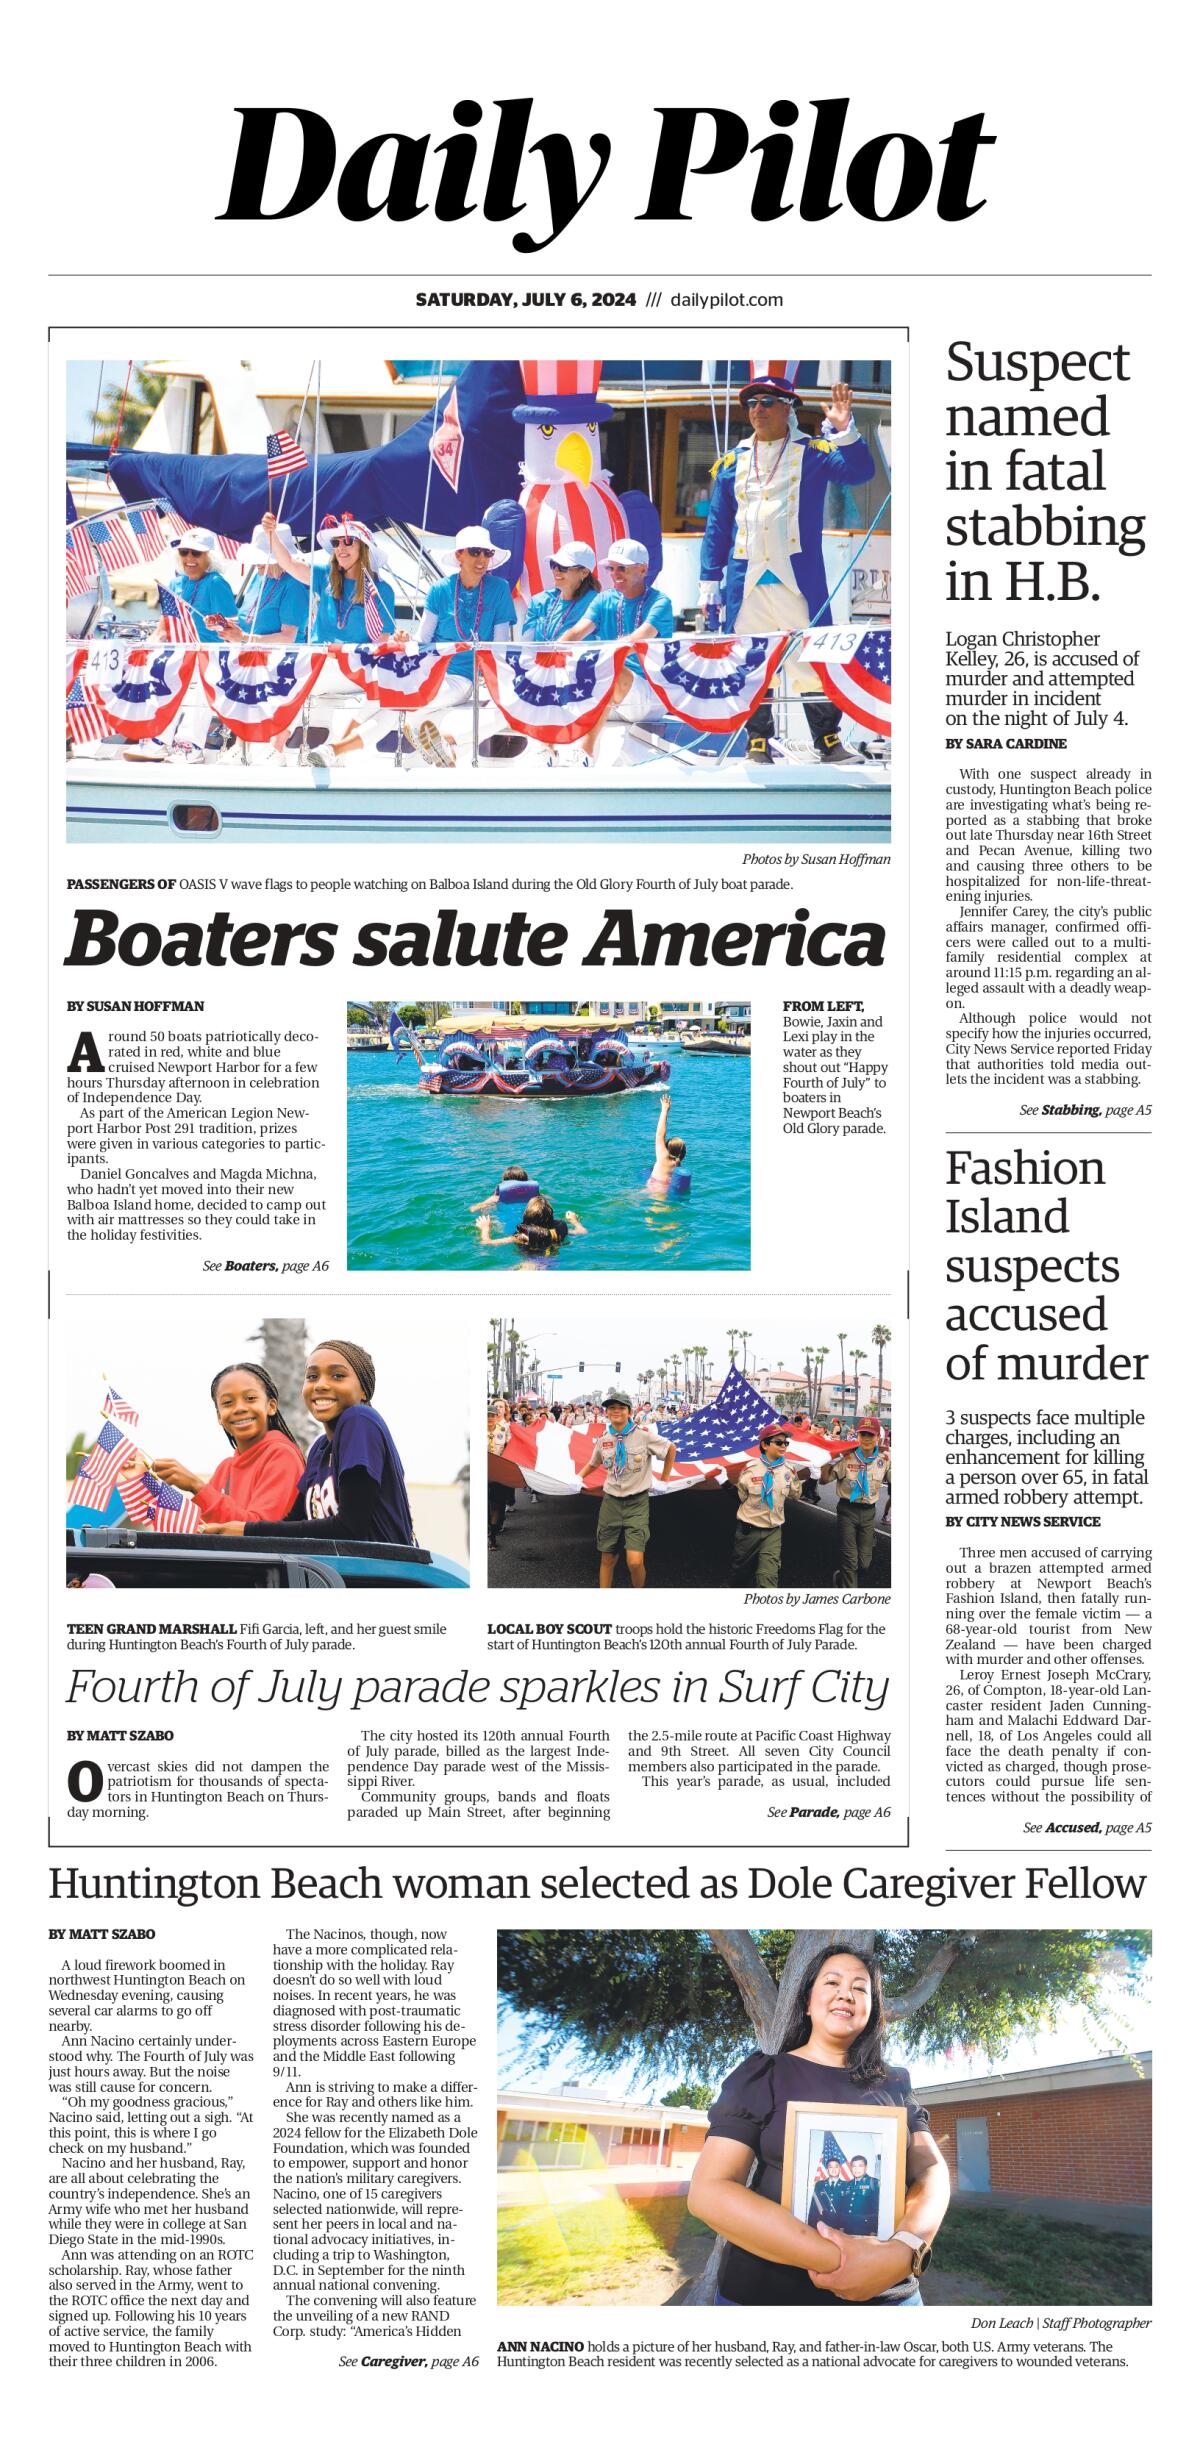 Front page of the Daily Pilot e-newspaper for Saturday, July 6, 2024.